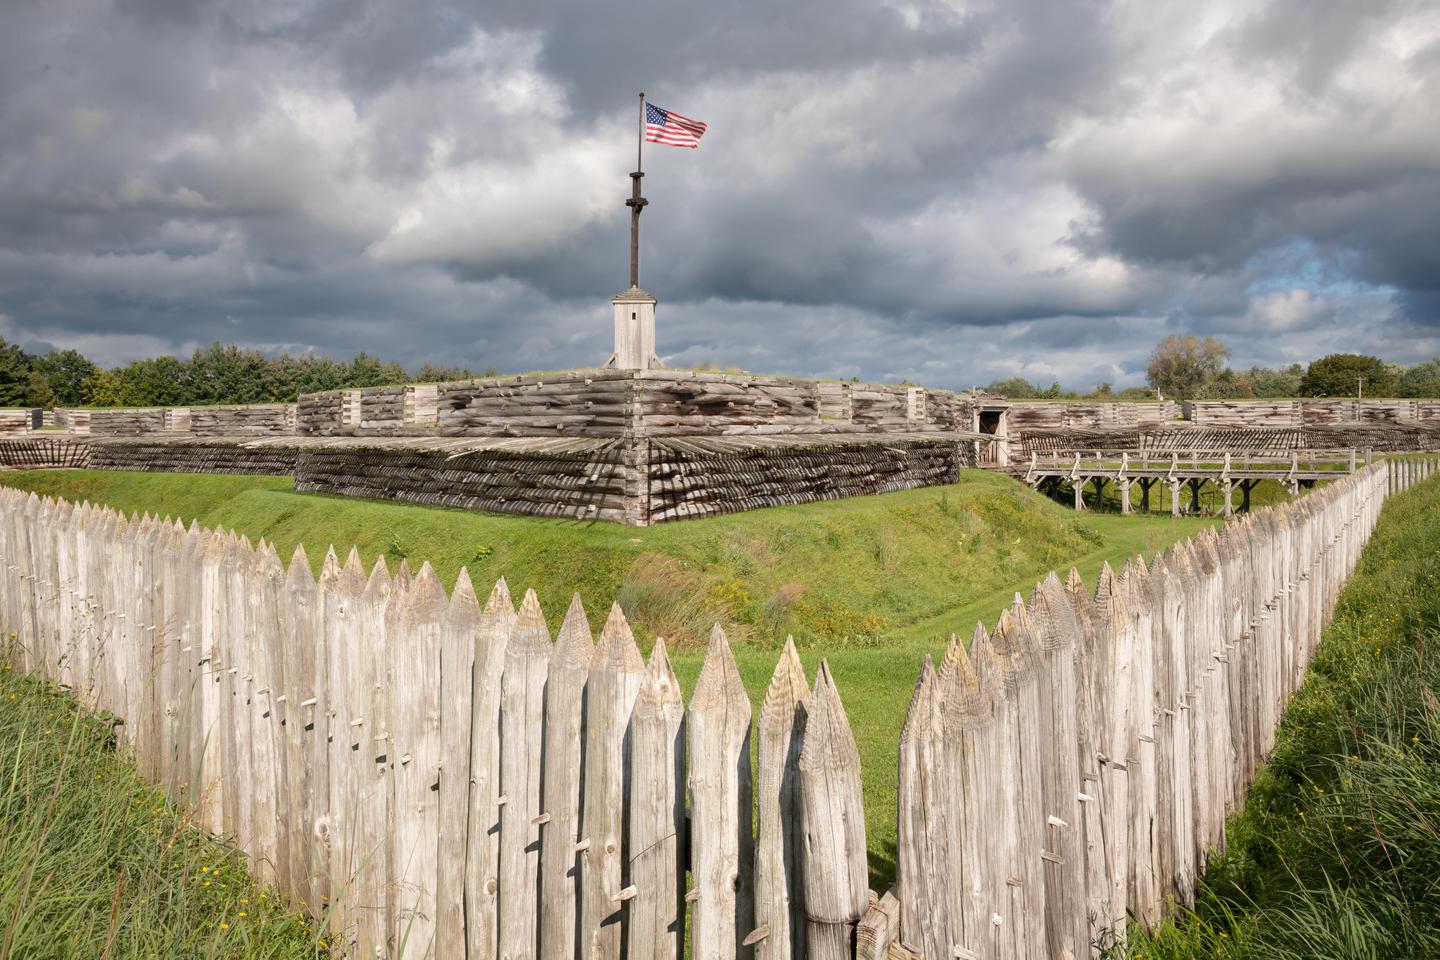 A Cloudy Day at Fort StanwixCome and visit the site with a thousand stories flying under the flag!